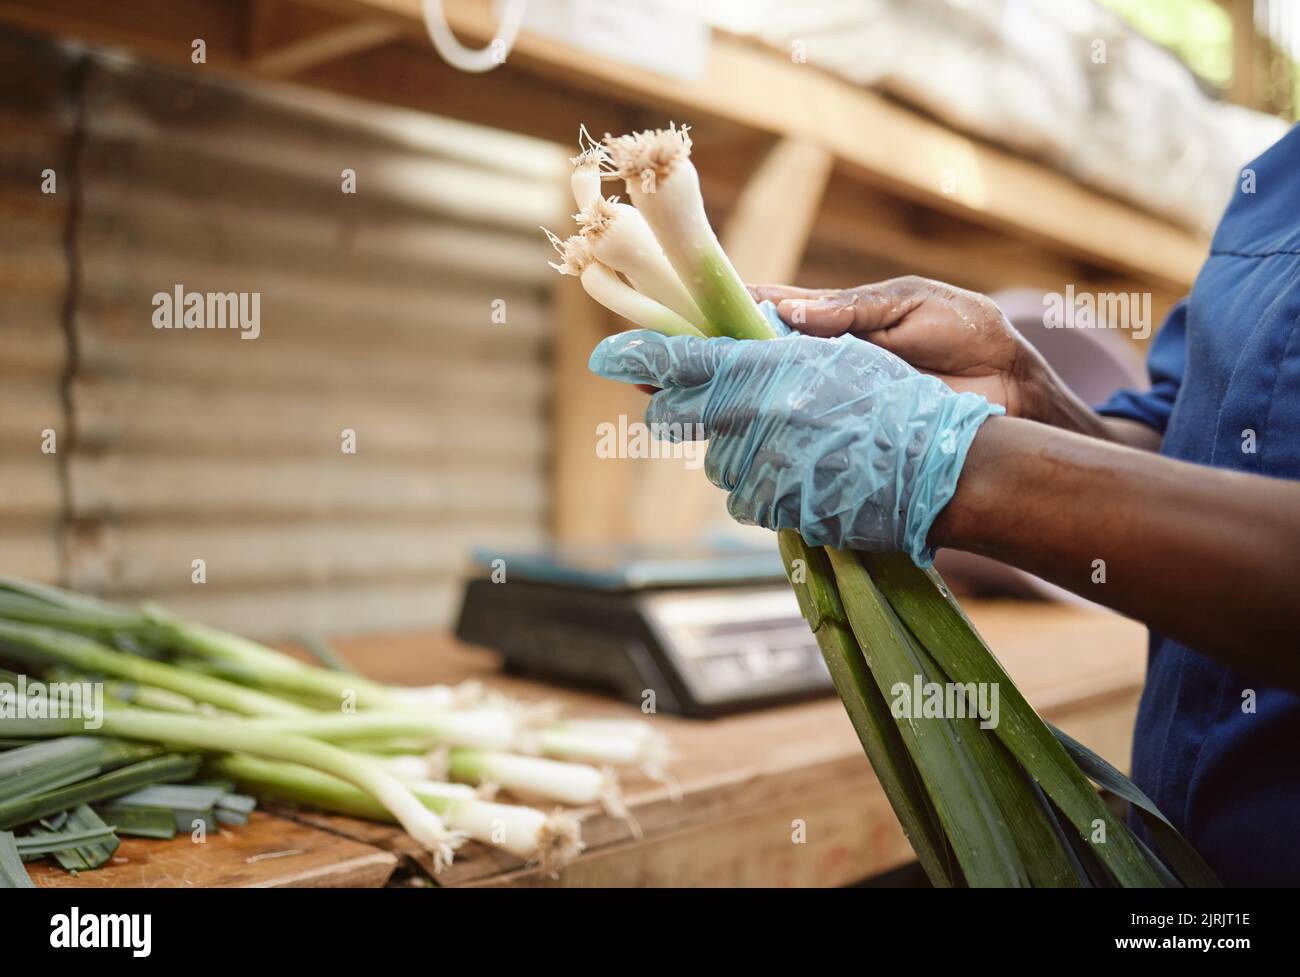 Farm, worker sorting spring onions for vegetable market. Health groceries and sale of green consumer products and lifestyle. Nature, agriculture and Stock Photo